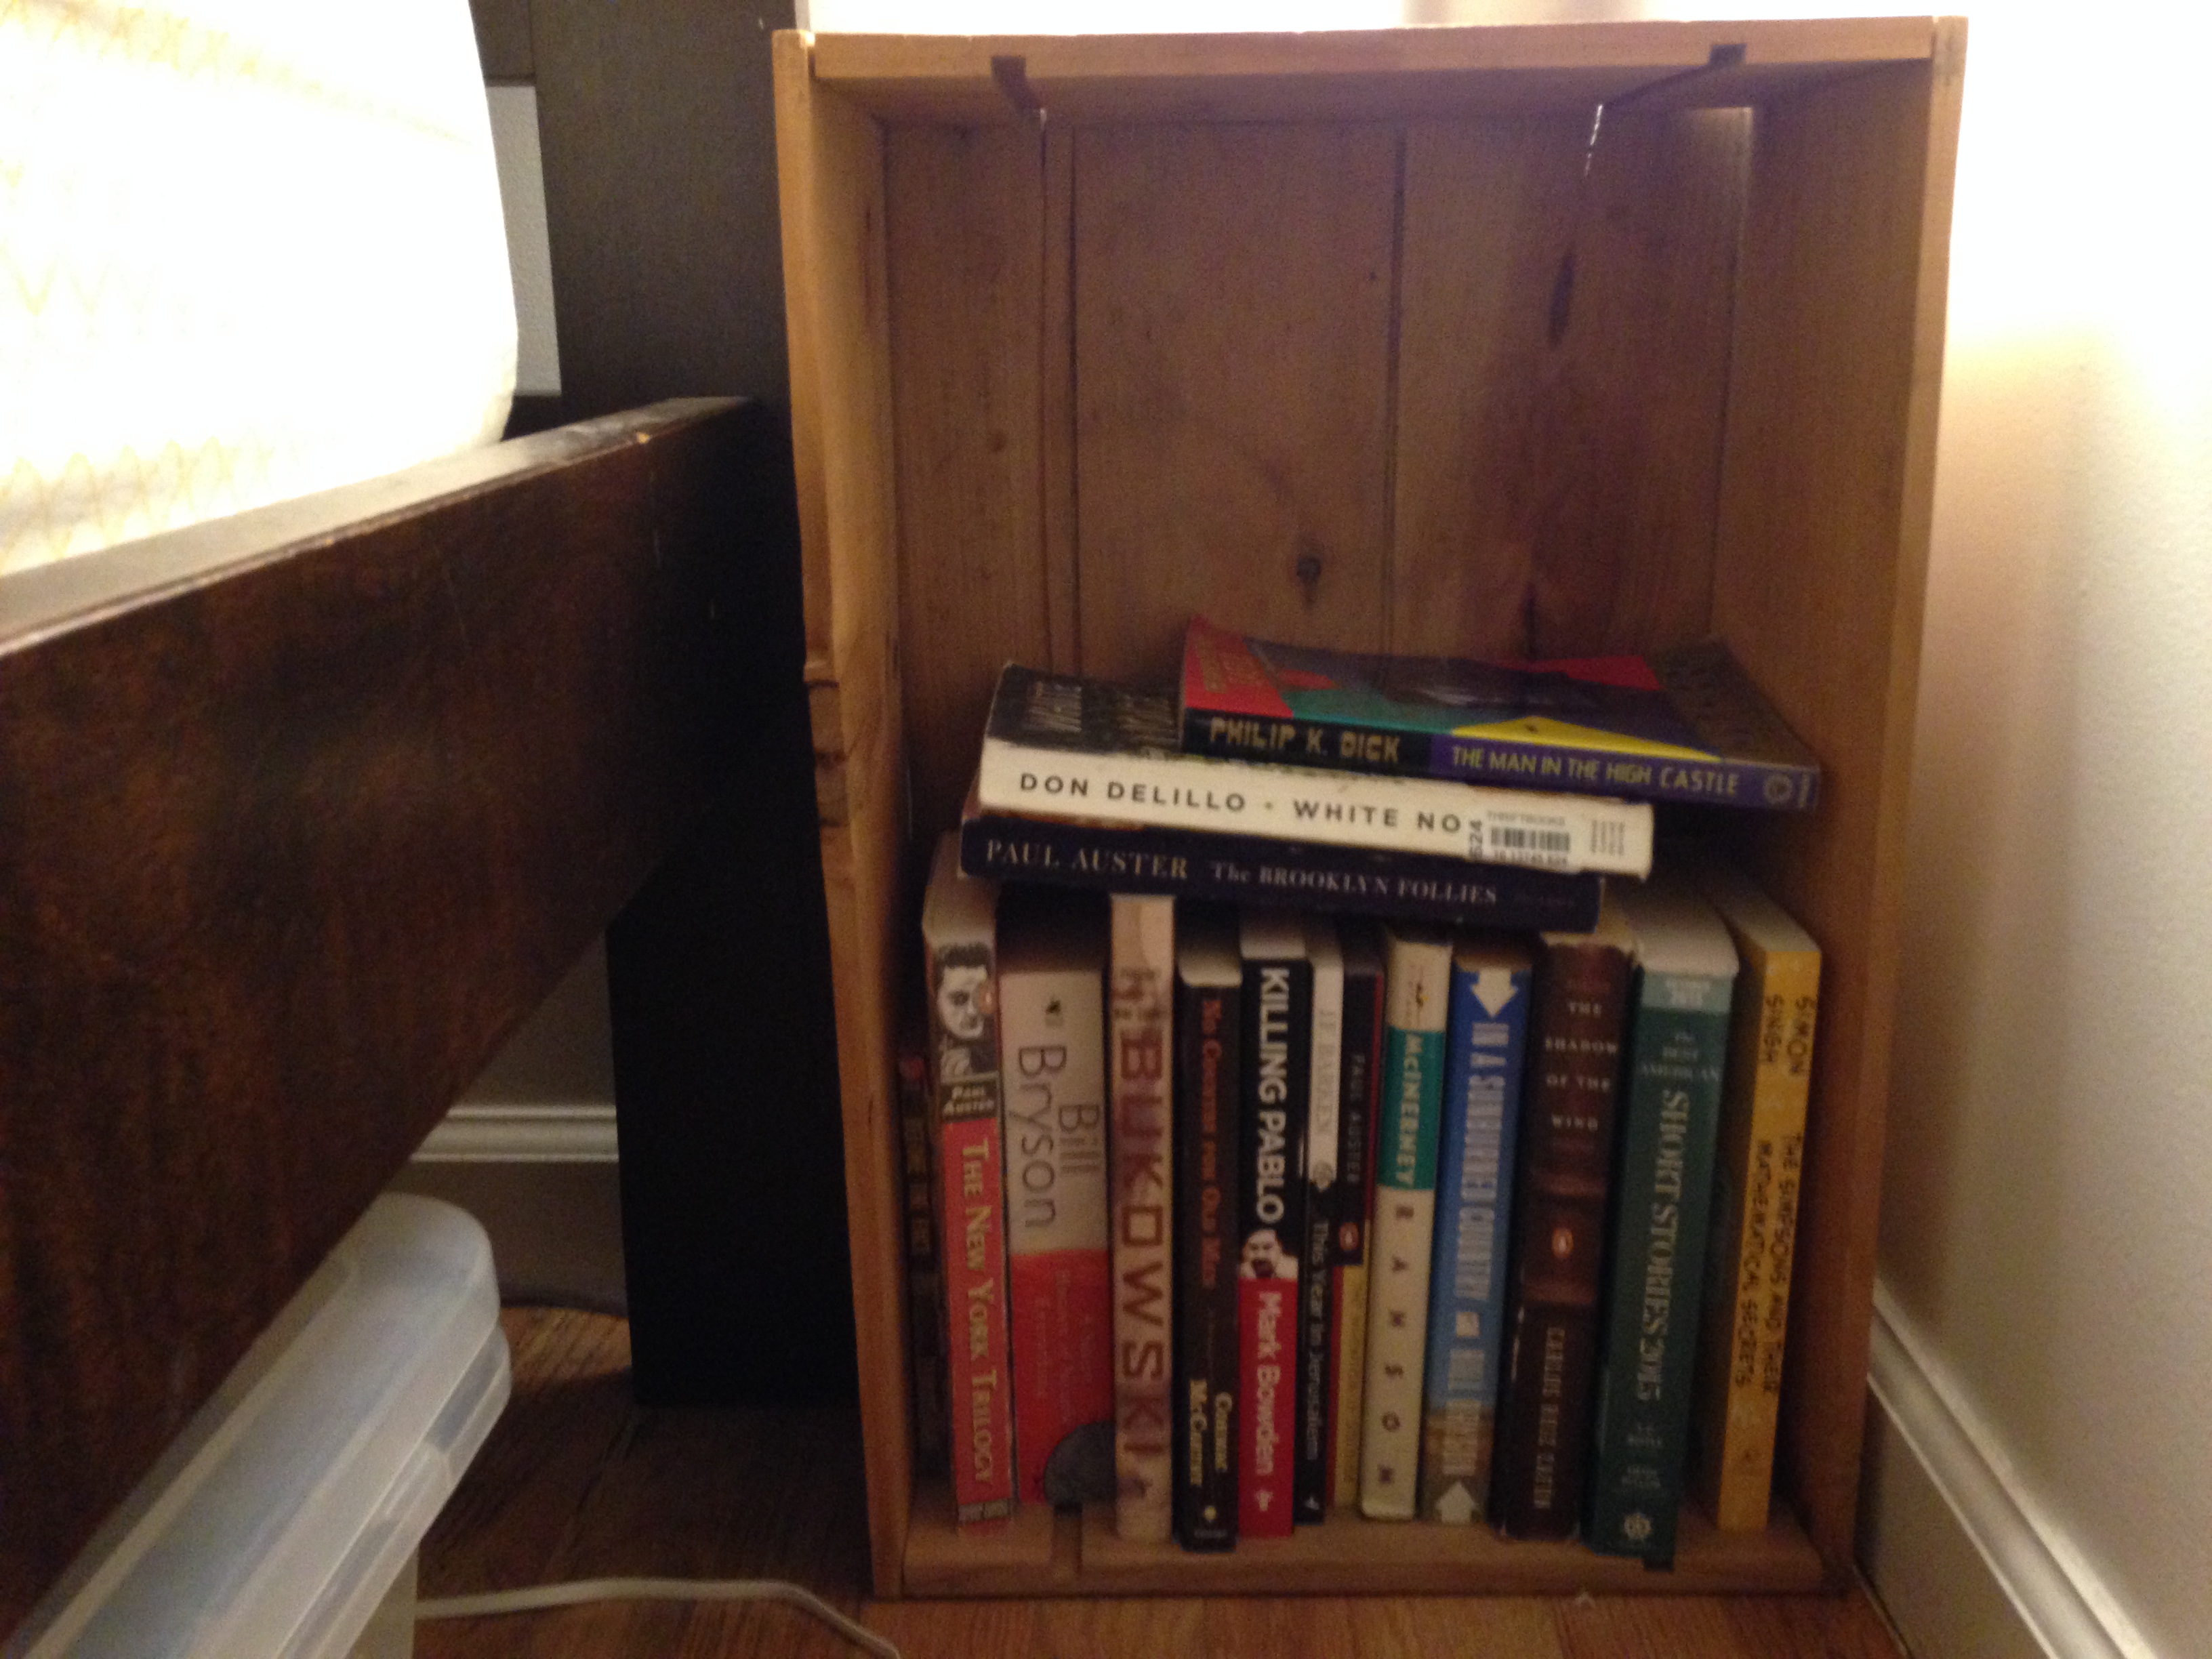 A DIY wooden crate used for book storage.